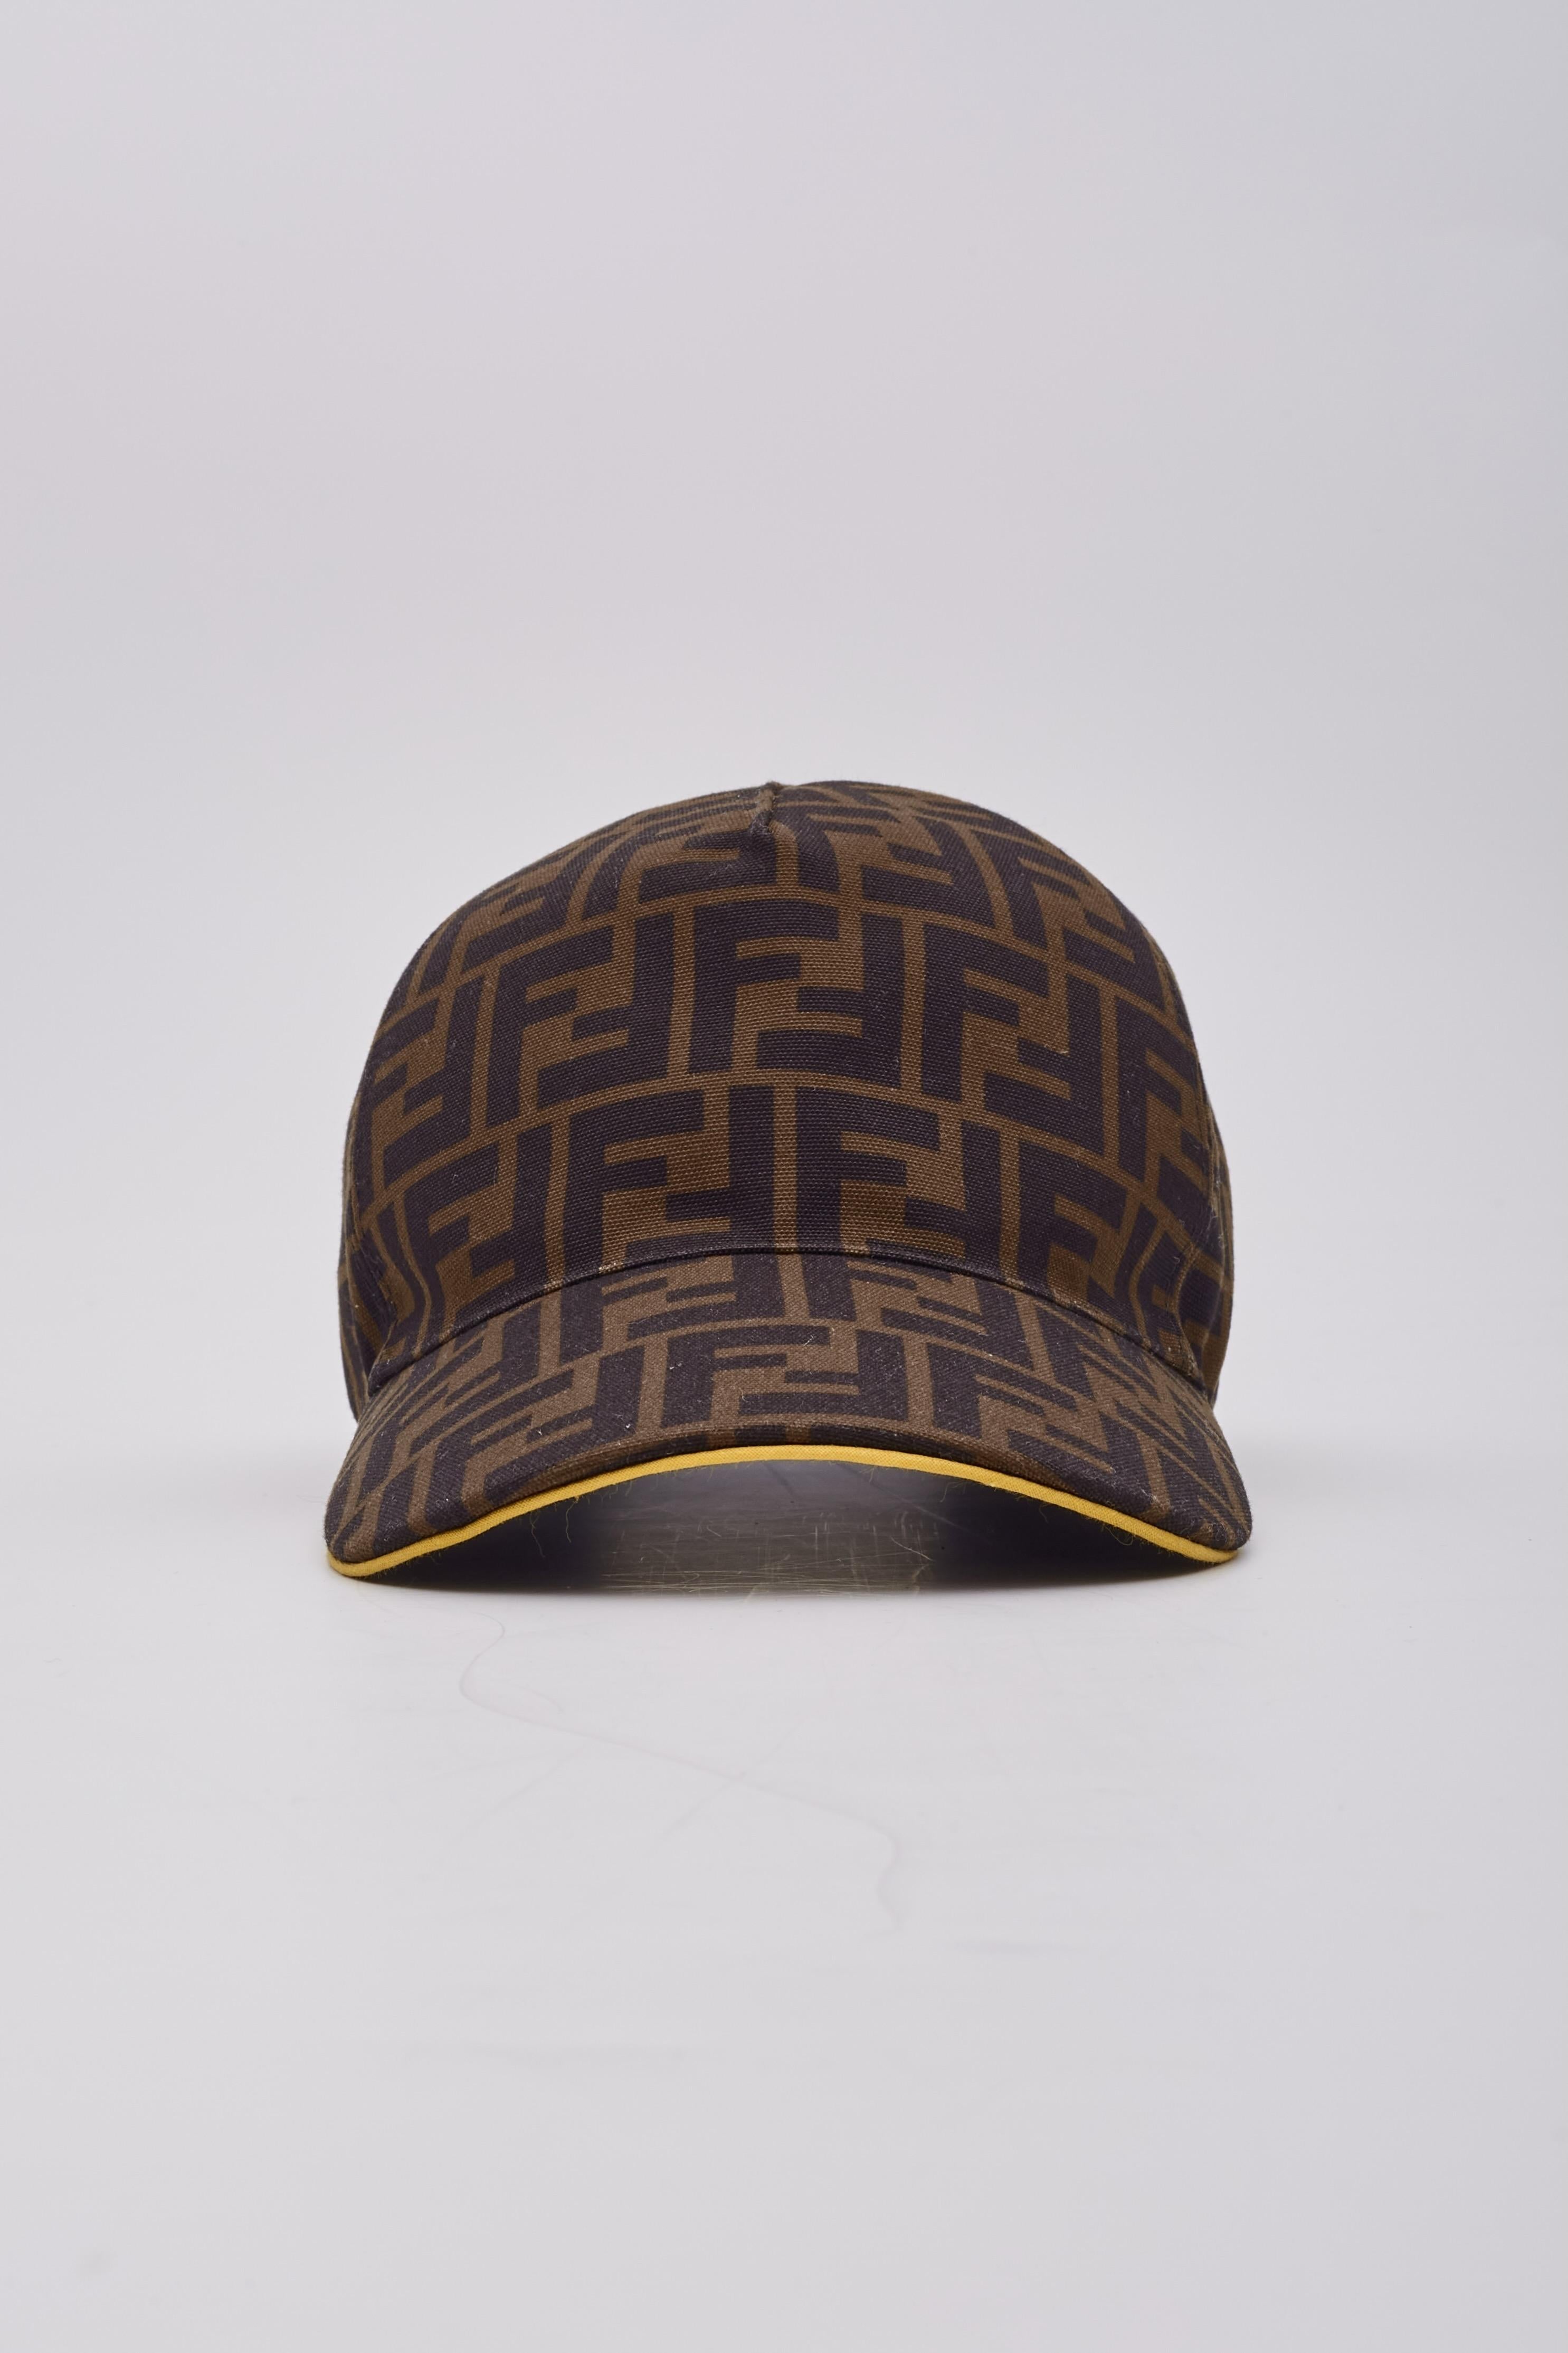 Fendi Canvas FF Reloaded Baseball Hat Tobacco Yellow In Excellent Condition For Sale In Montreal, Quebec